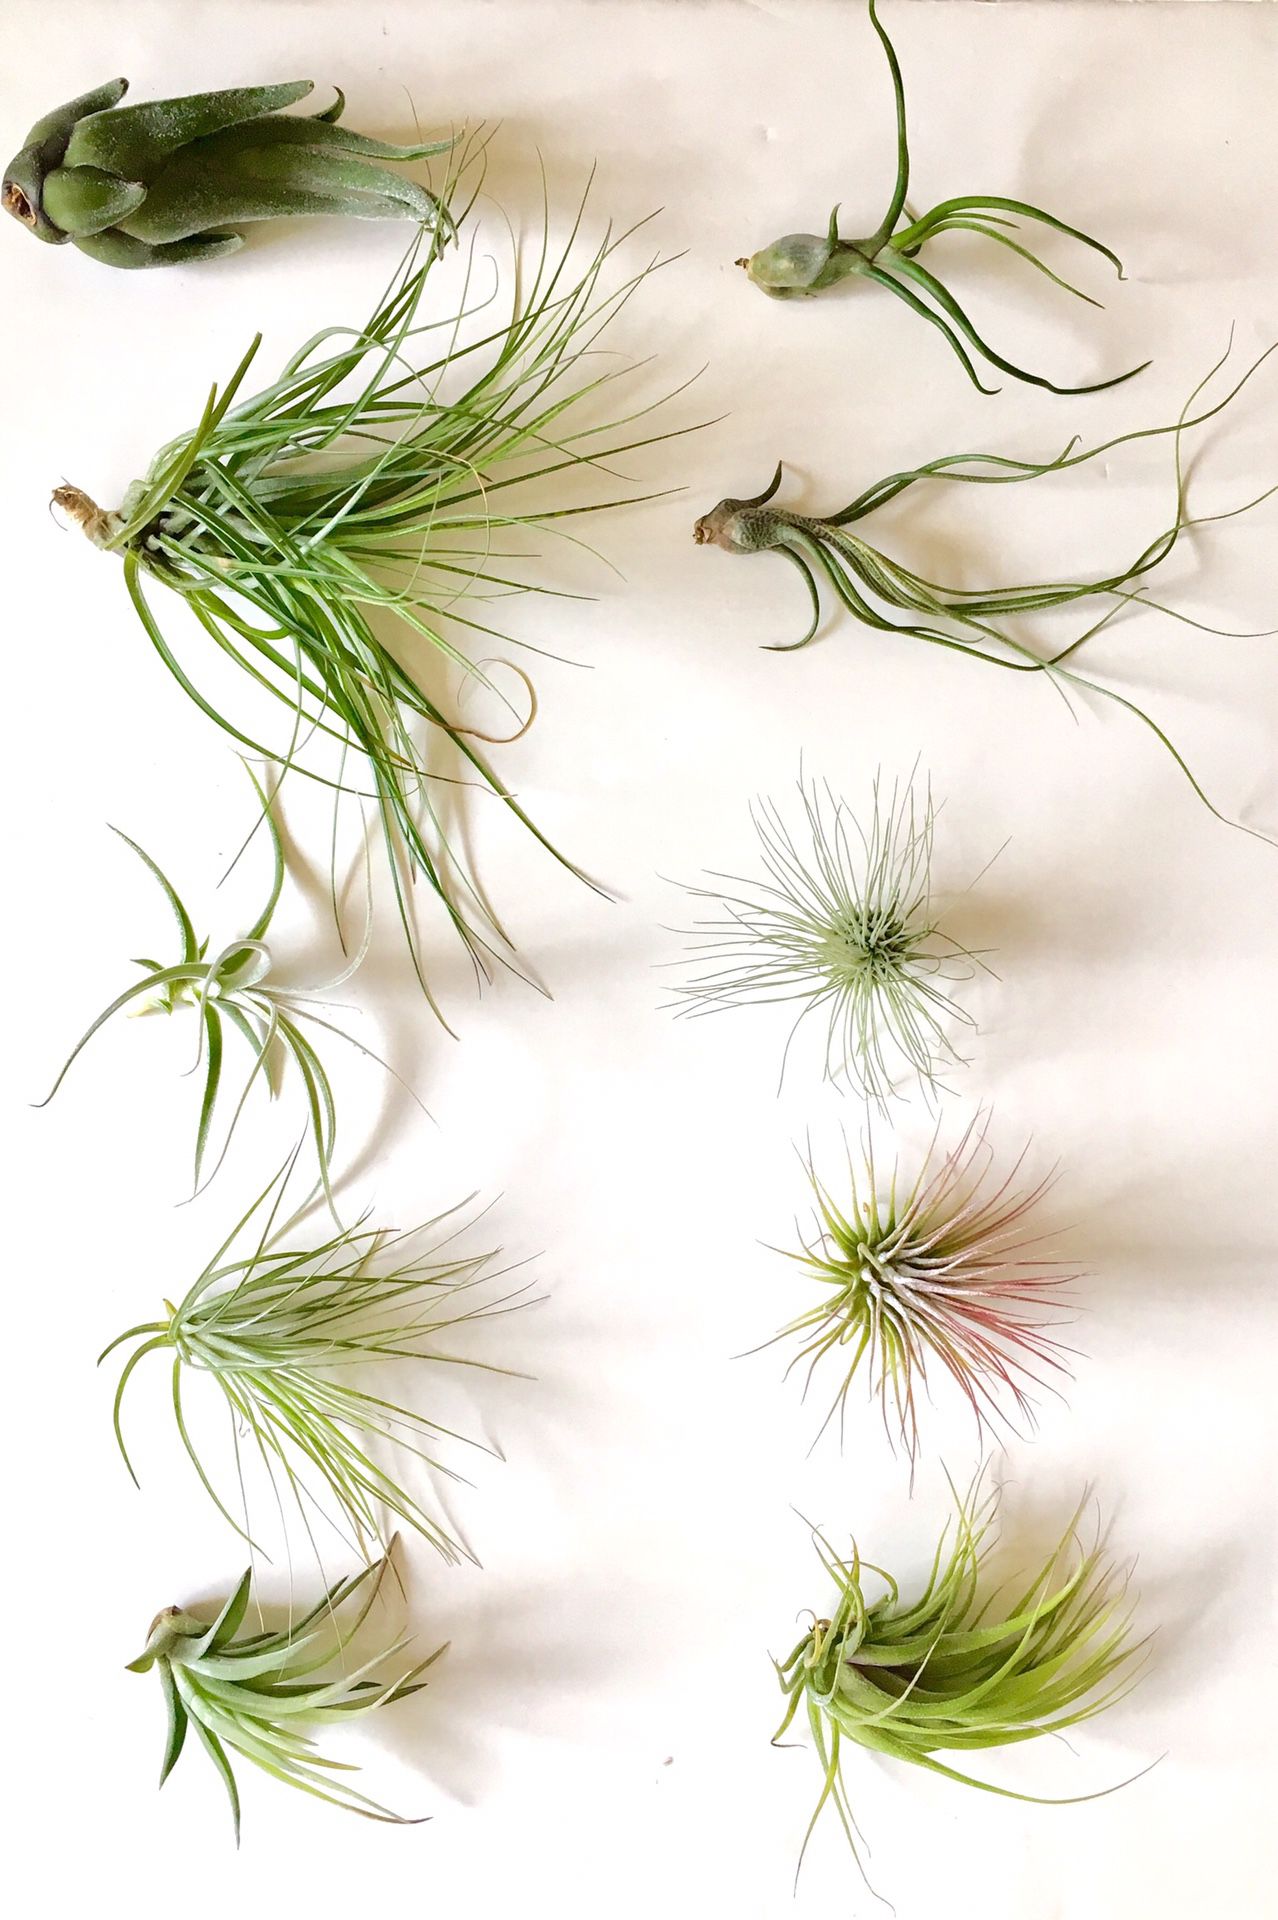 Ten Assorted Live Air Plants Size 3" to 7", Very Interesting Mixed Air Plants for Terrariums, All Different Kind